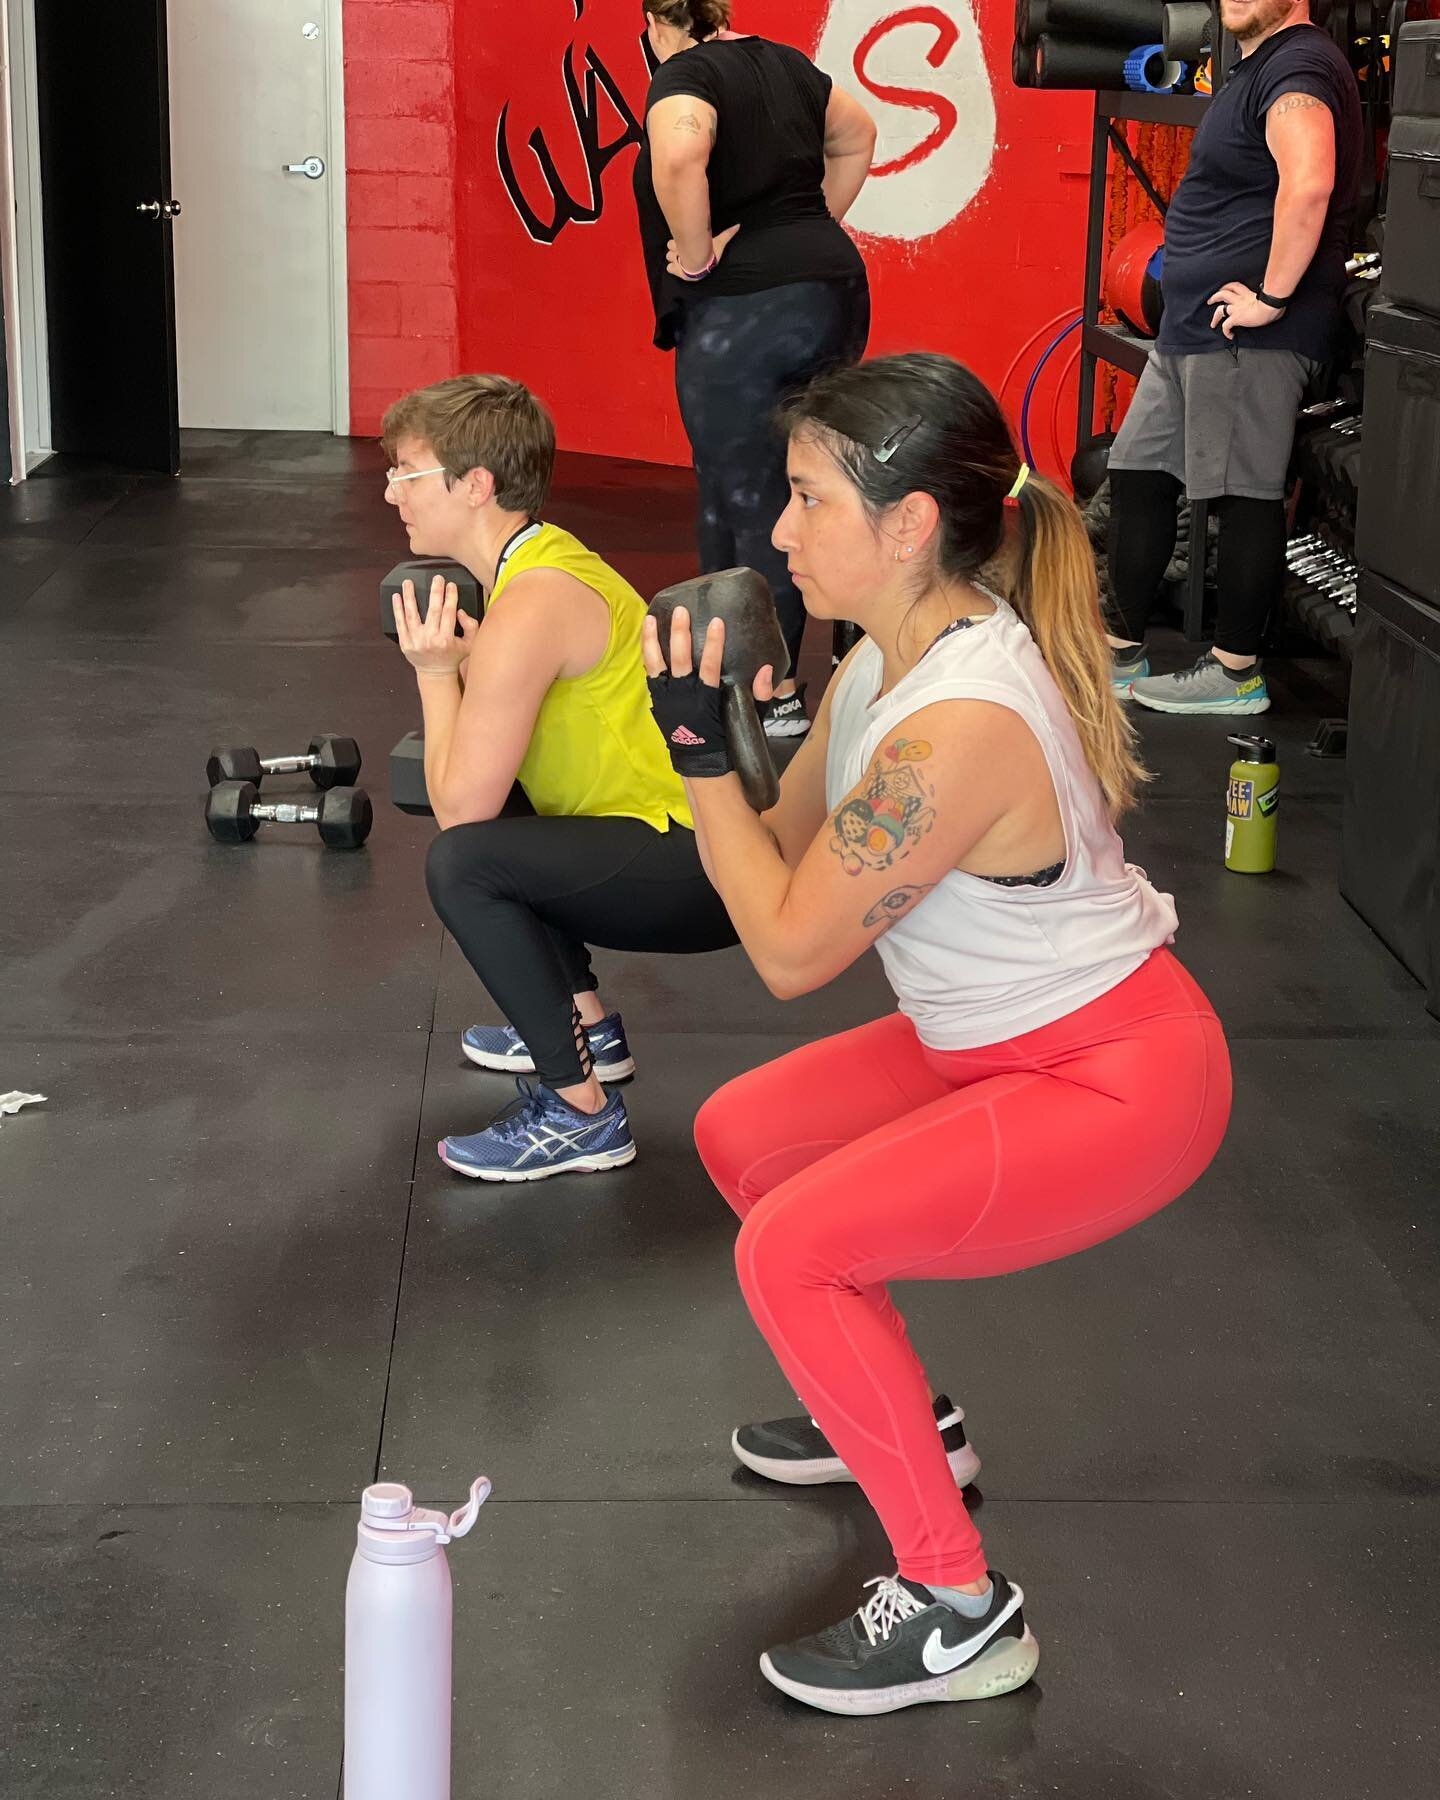 We pretty much lift, laugh, talk about murder podcast, food, or complain about ISO&rsquo;s all on repeat! Theres no better community!! 
&bull;
&bull;
Come try a class on us! 
&bull;
#sweatathletics #sweatatx #lowerbodyworkout #fitnesscommunity #stren